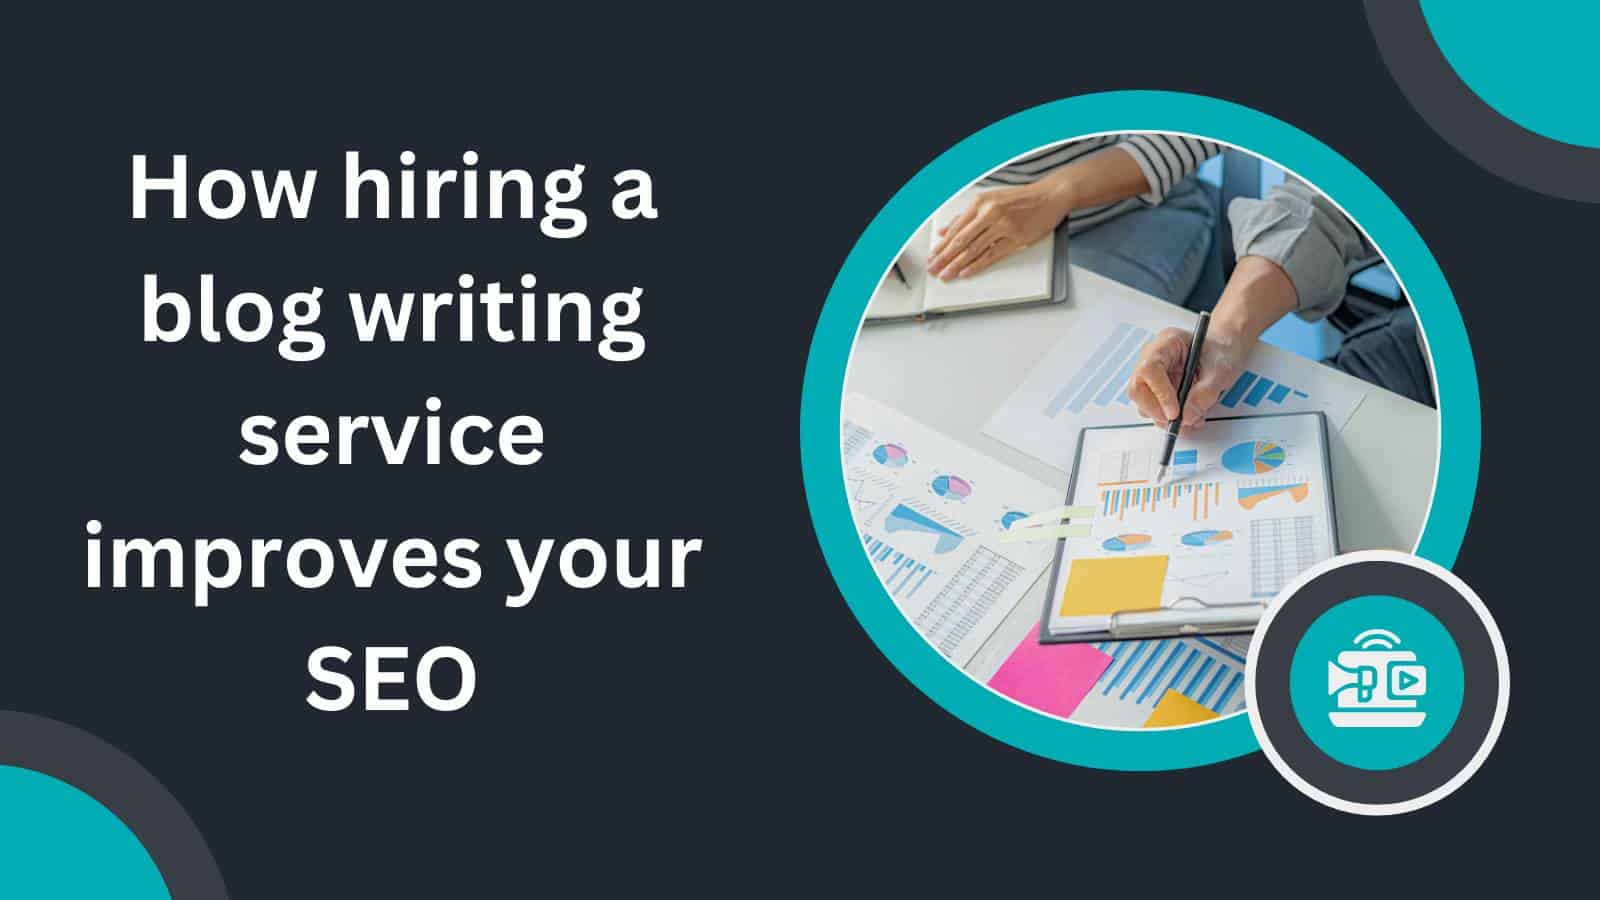 How hiring a blog writing service improves your SEO